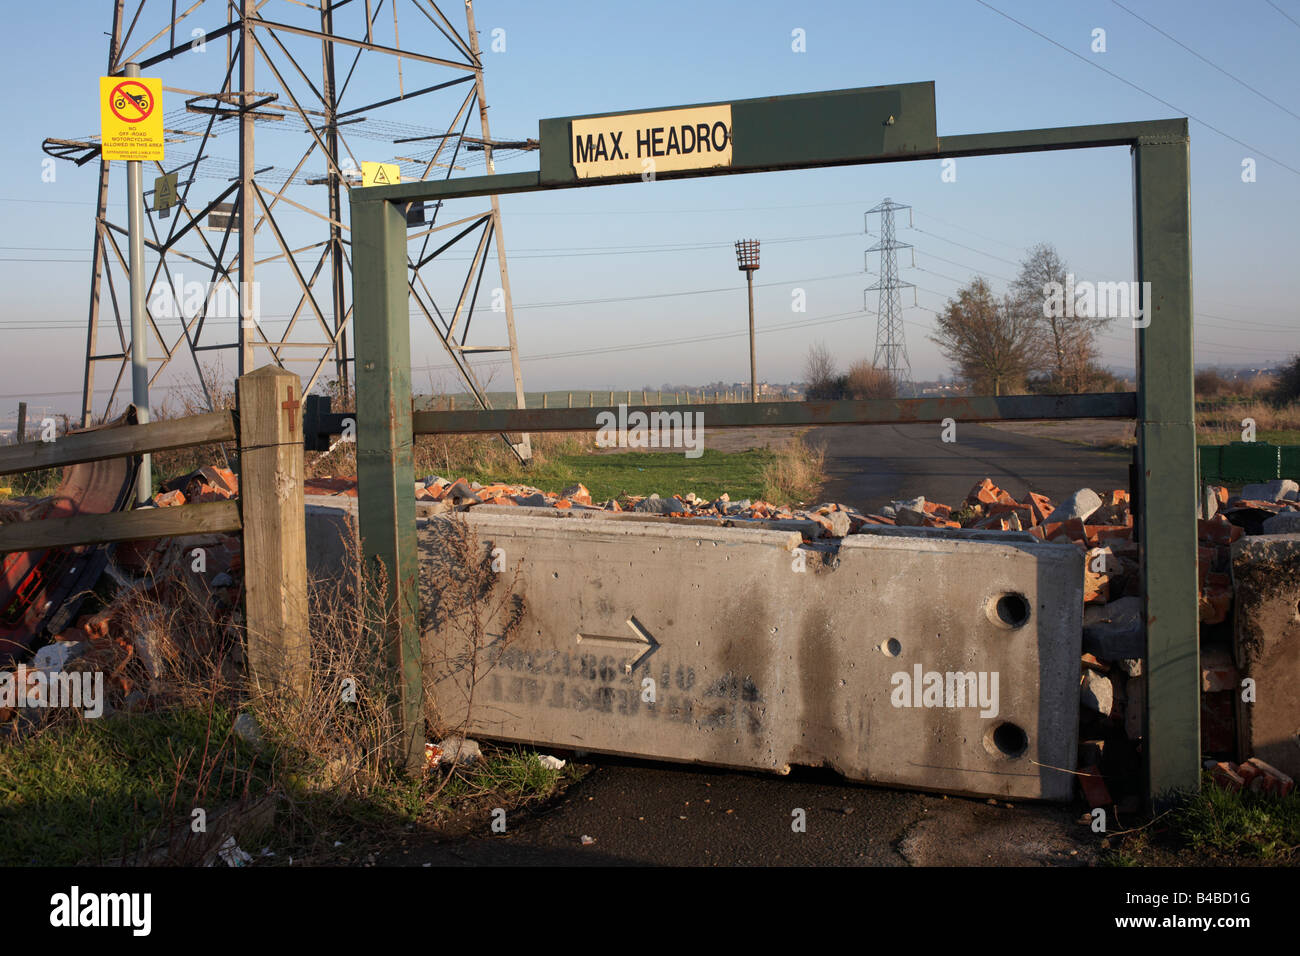 To deter fly-tippers, a barricaded and disused car park entrance is near L6 electricity pylons at Dartford, Kent. Stock Photo